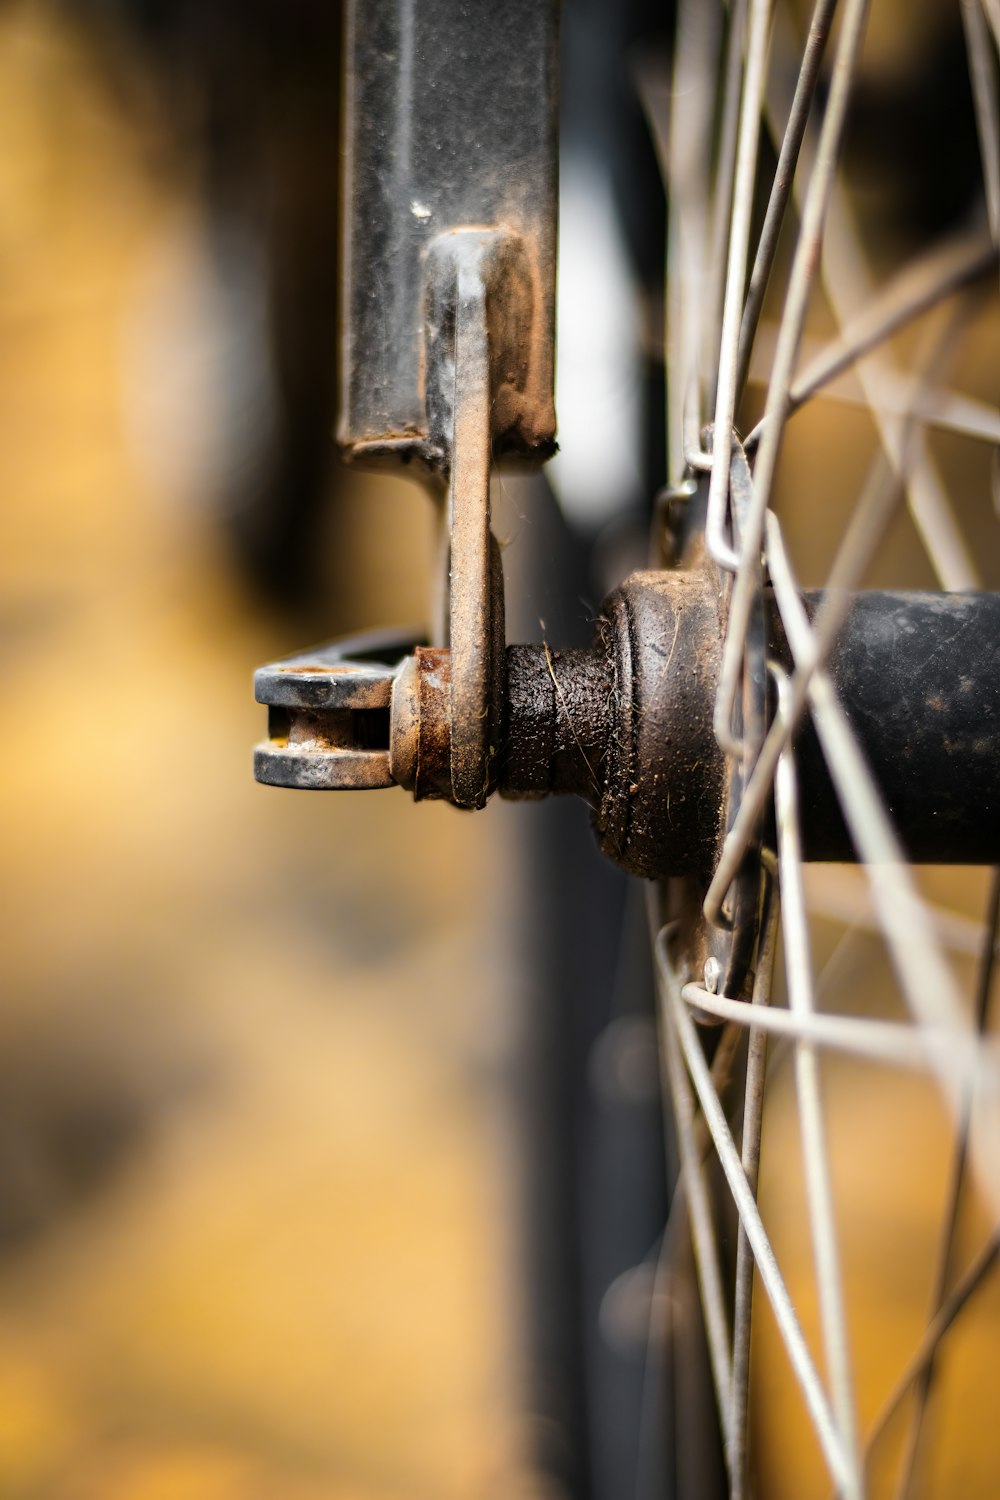 a close up of the spokes of a bicycle